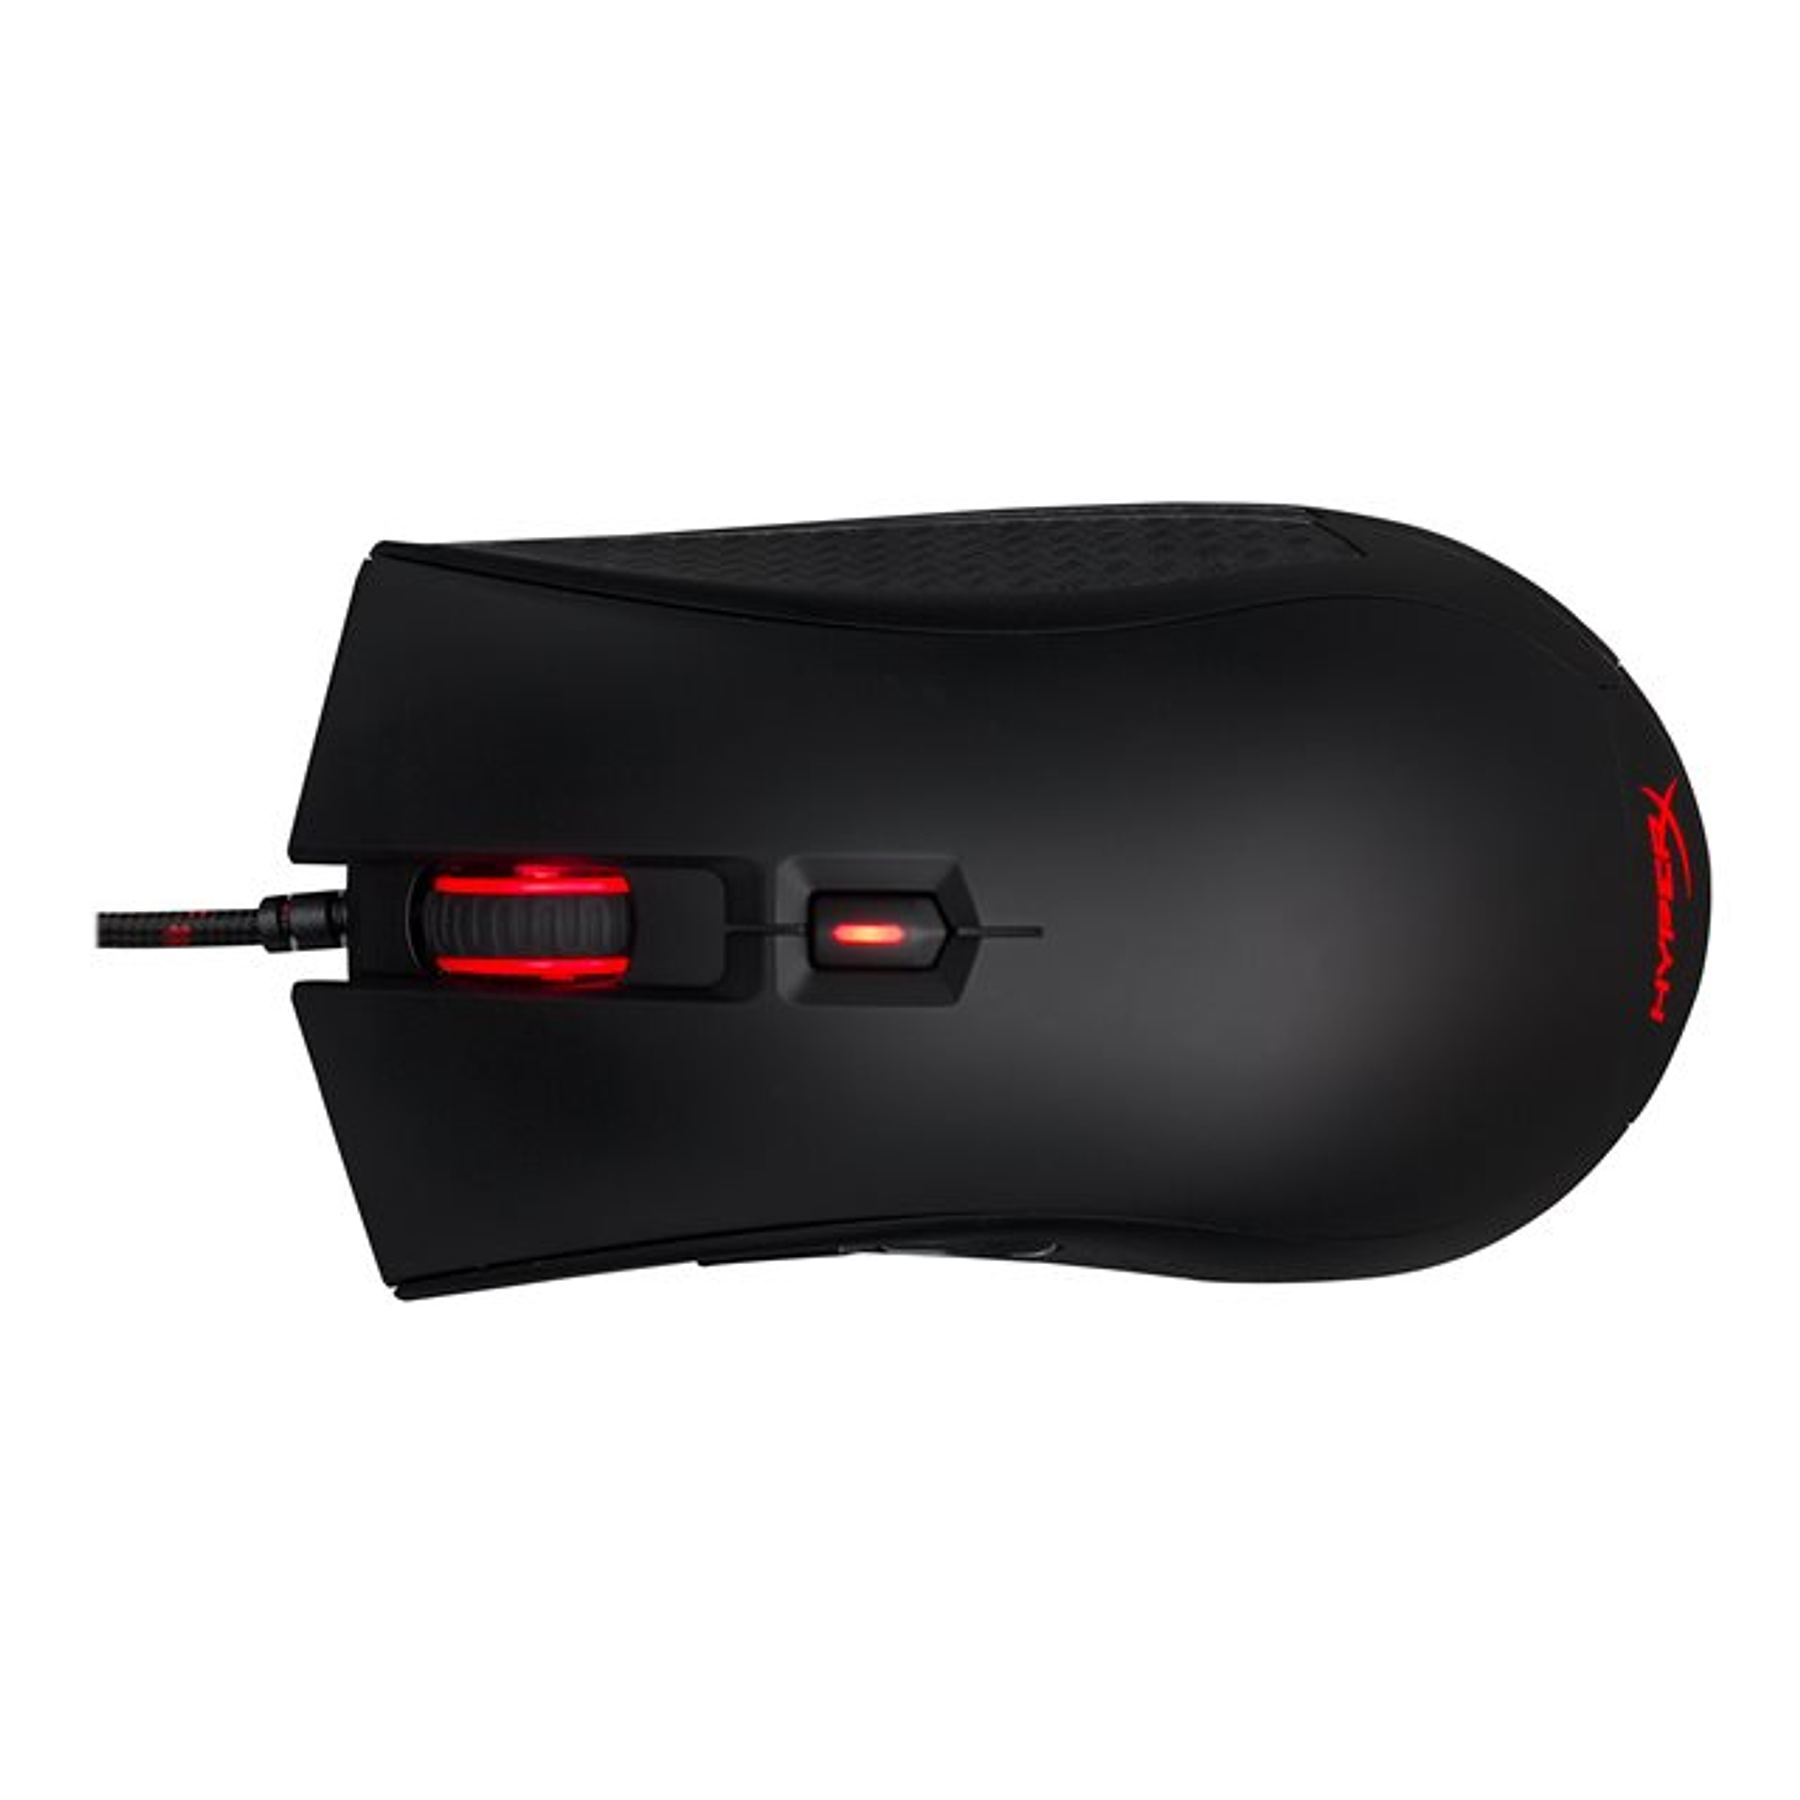 HyperX Mouse Pulsefire FPS Pro RGB Gaming